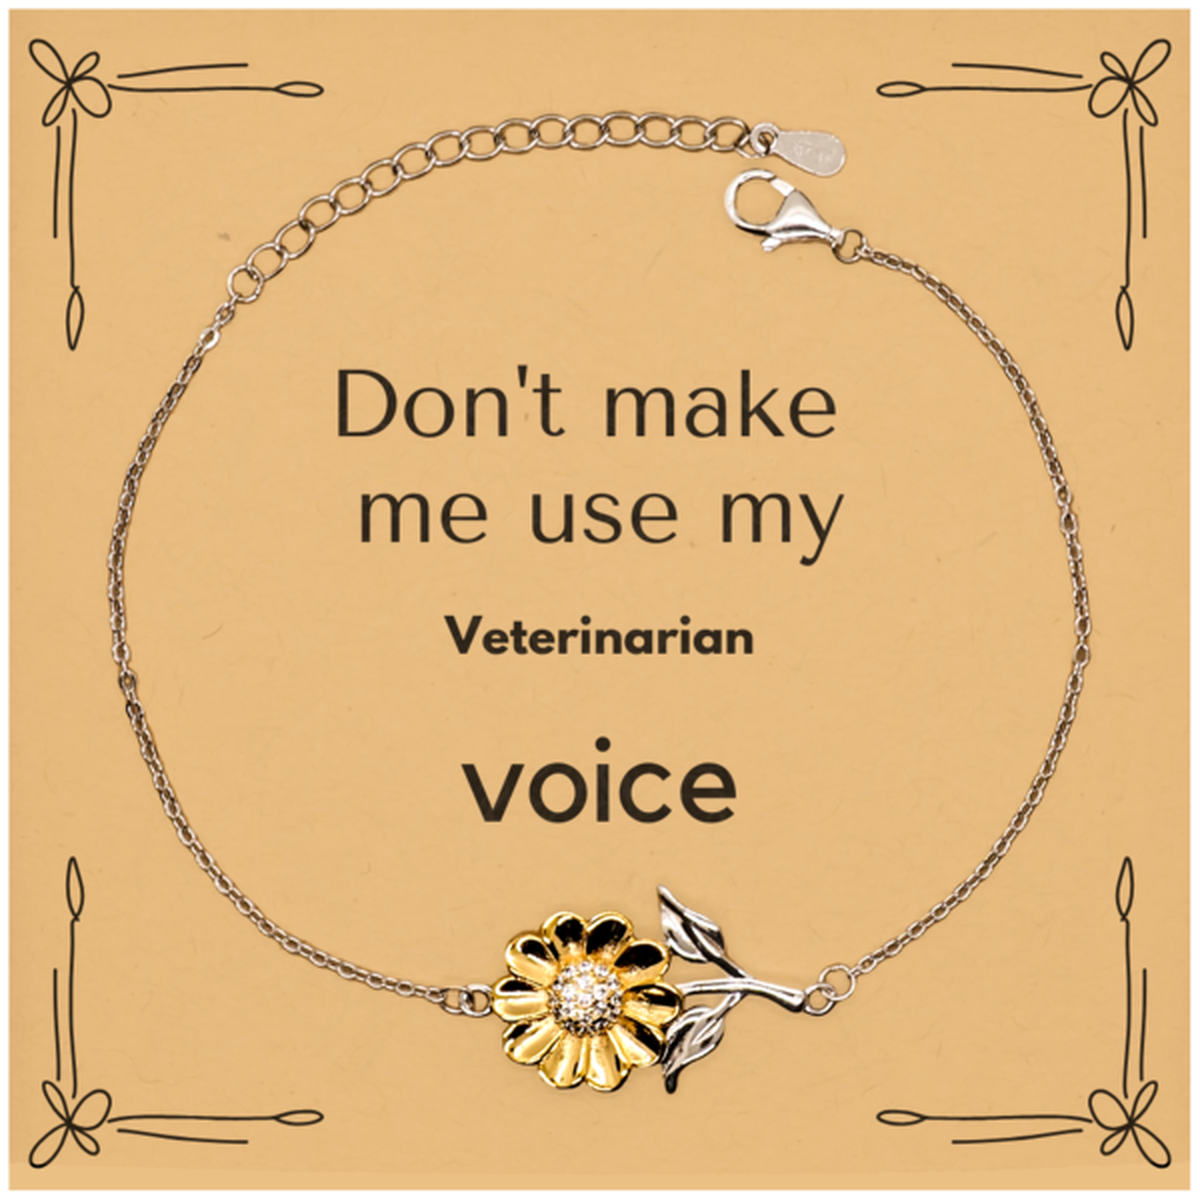 Don't make me use my Veterinarian voice, Sarcasm Veterinarian Card Gifts, Christmas Veterinarian Sunflower Bracelet Birthday Unique Gifts For Veterinarian Coworkers, Men, Women, Colleague, Friends